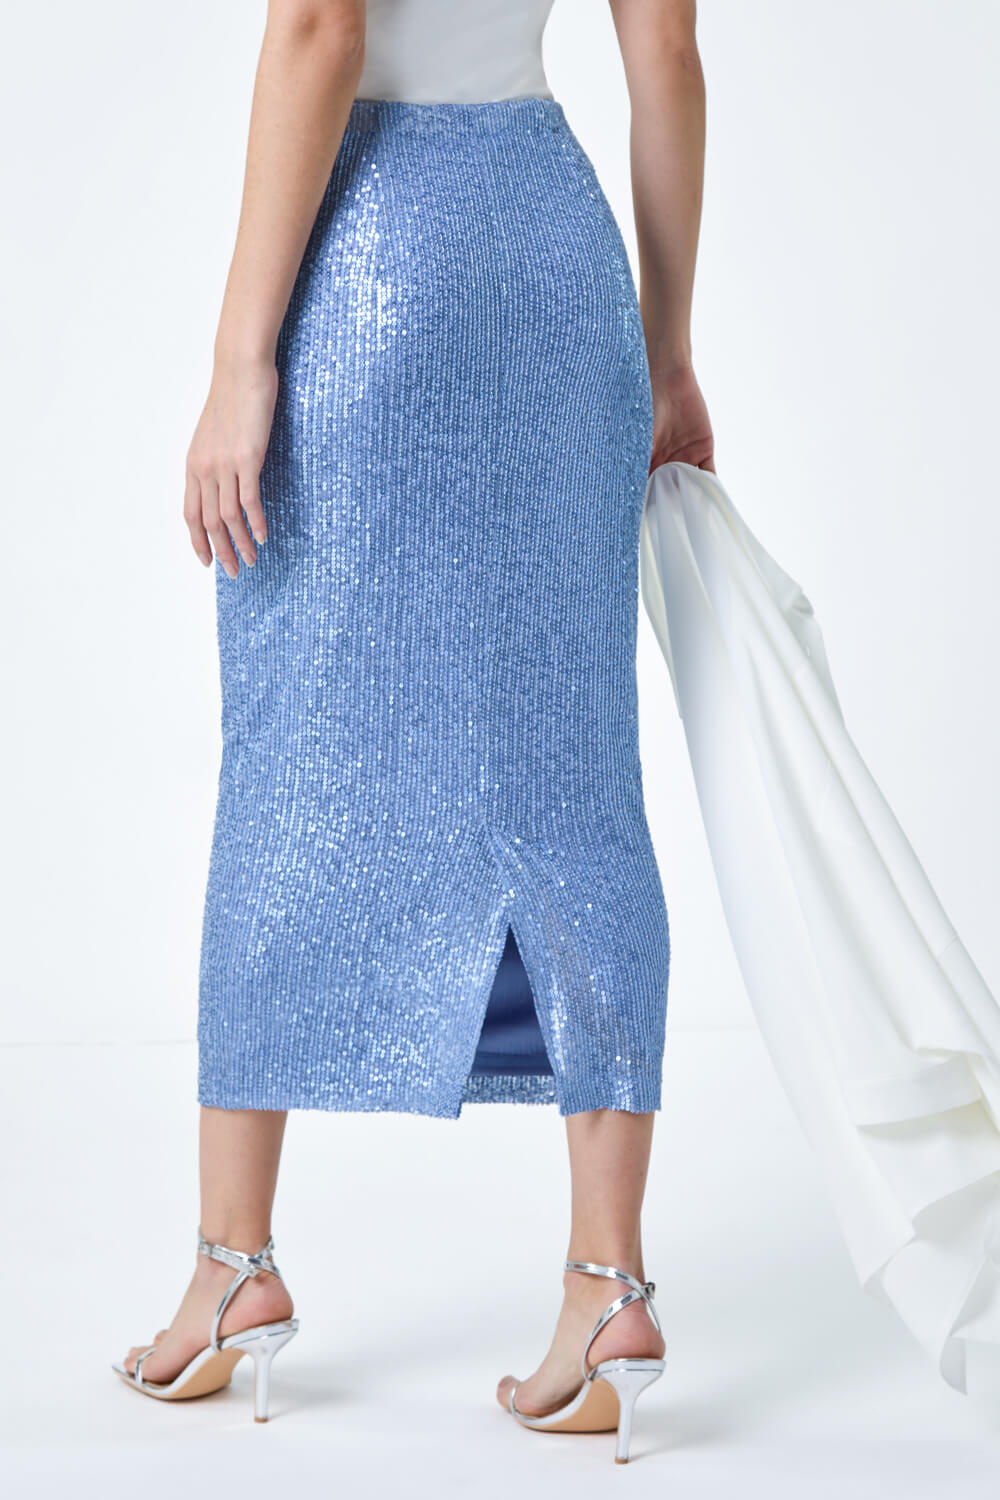 Steel Blue Sequin Sparkle Stretch Midi Skirt, Image 3 of 5